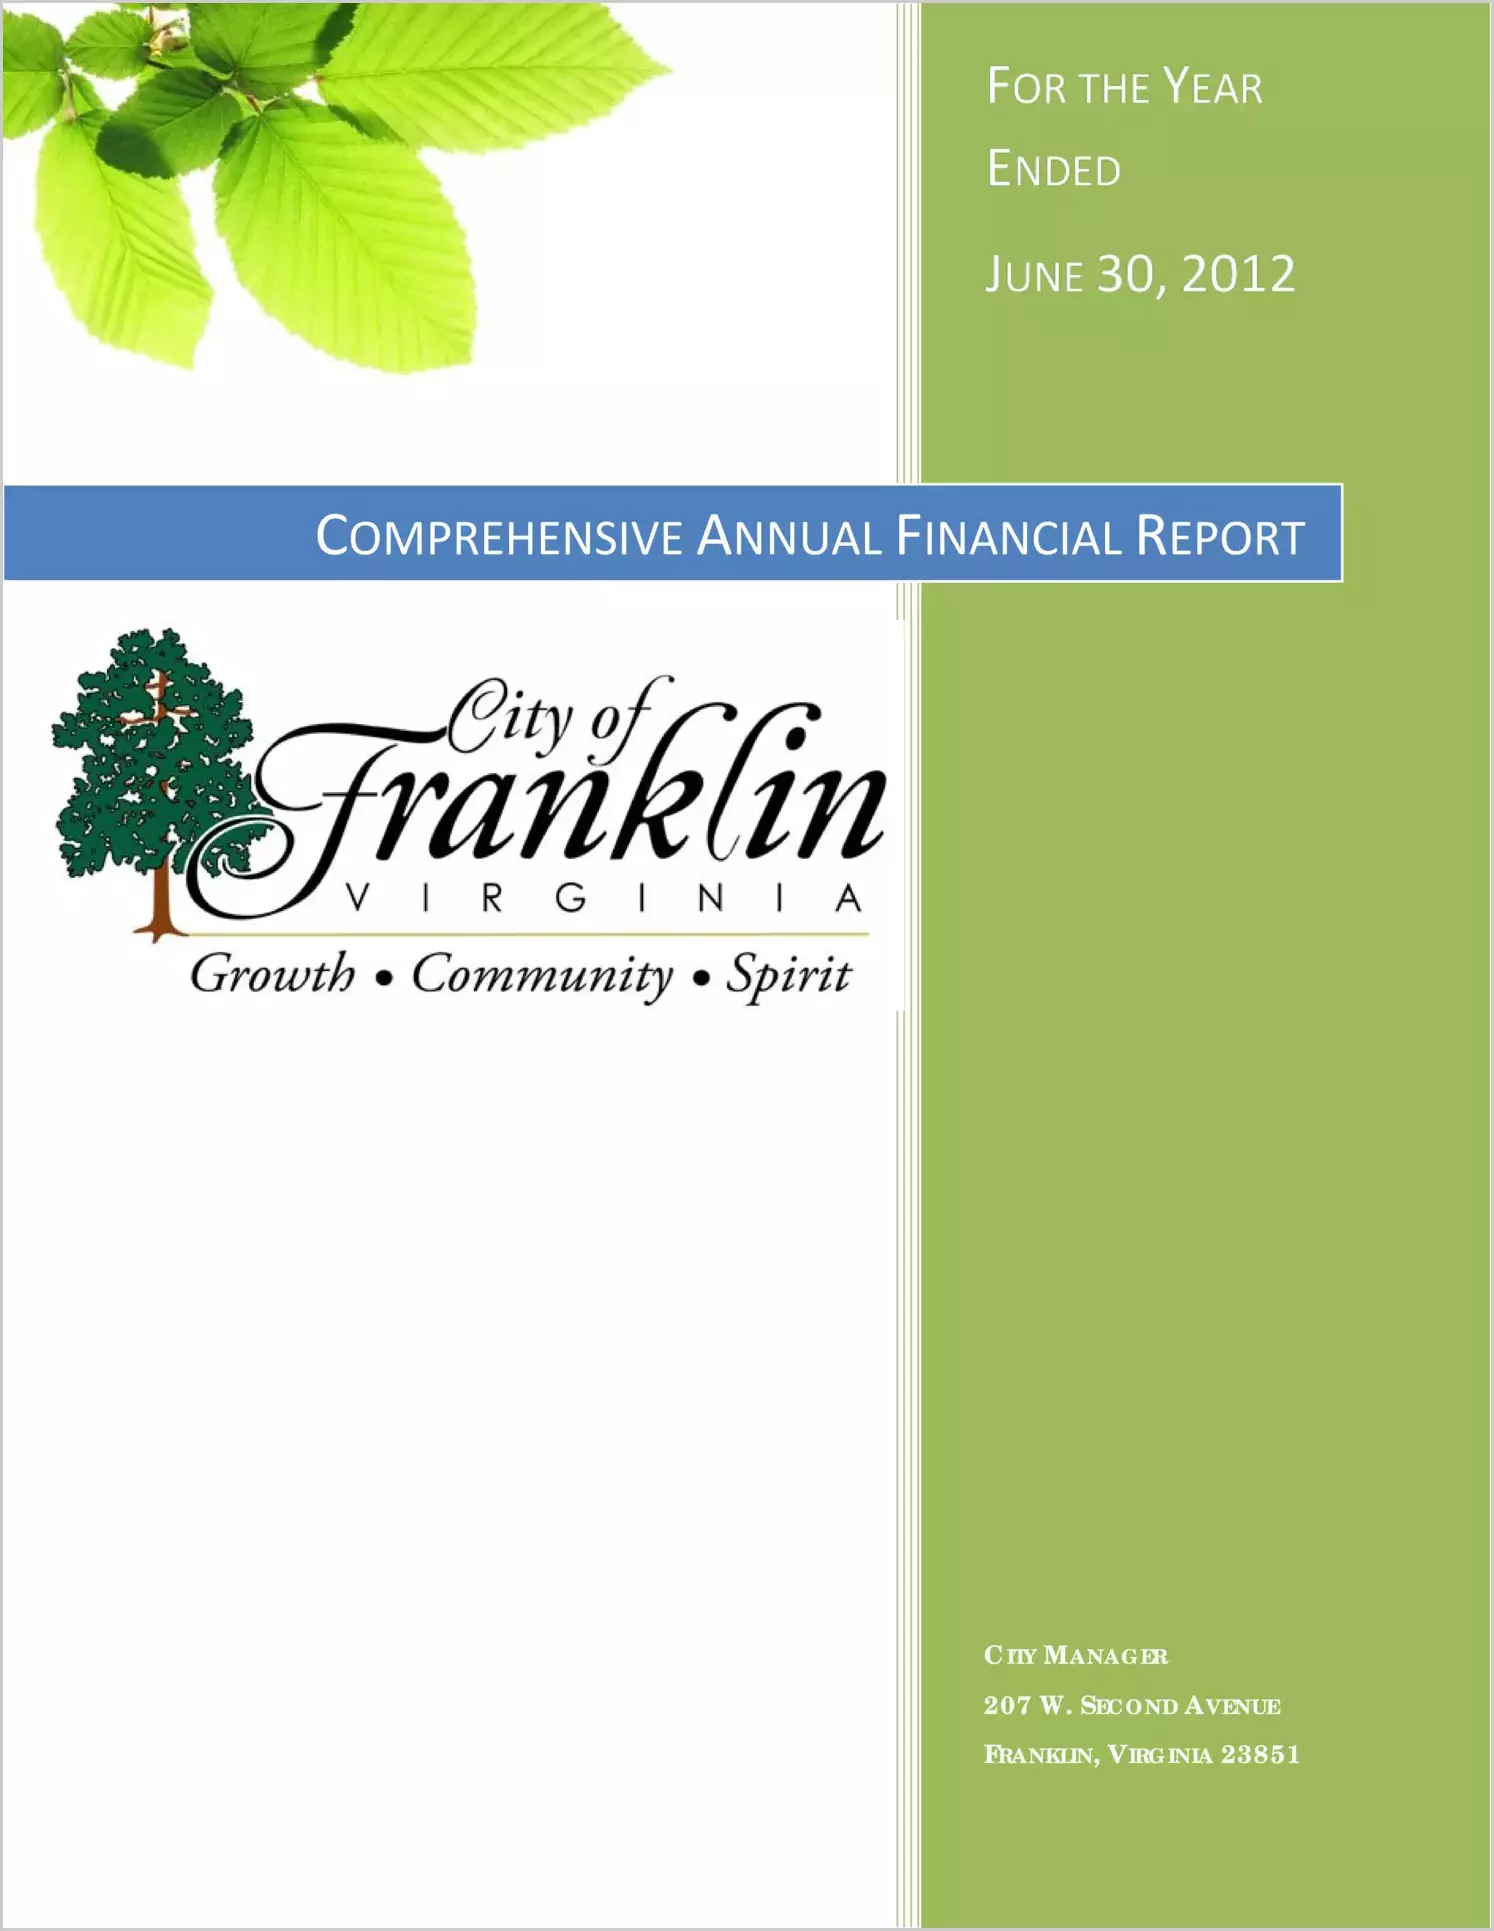 2012 Annual Financial Report for City of Franklin